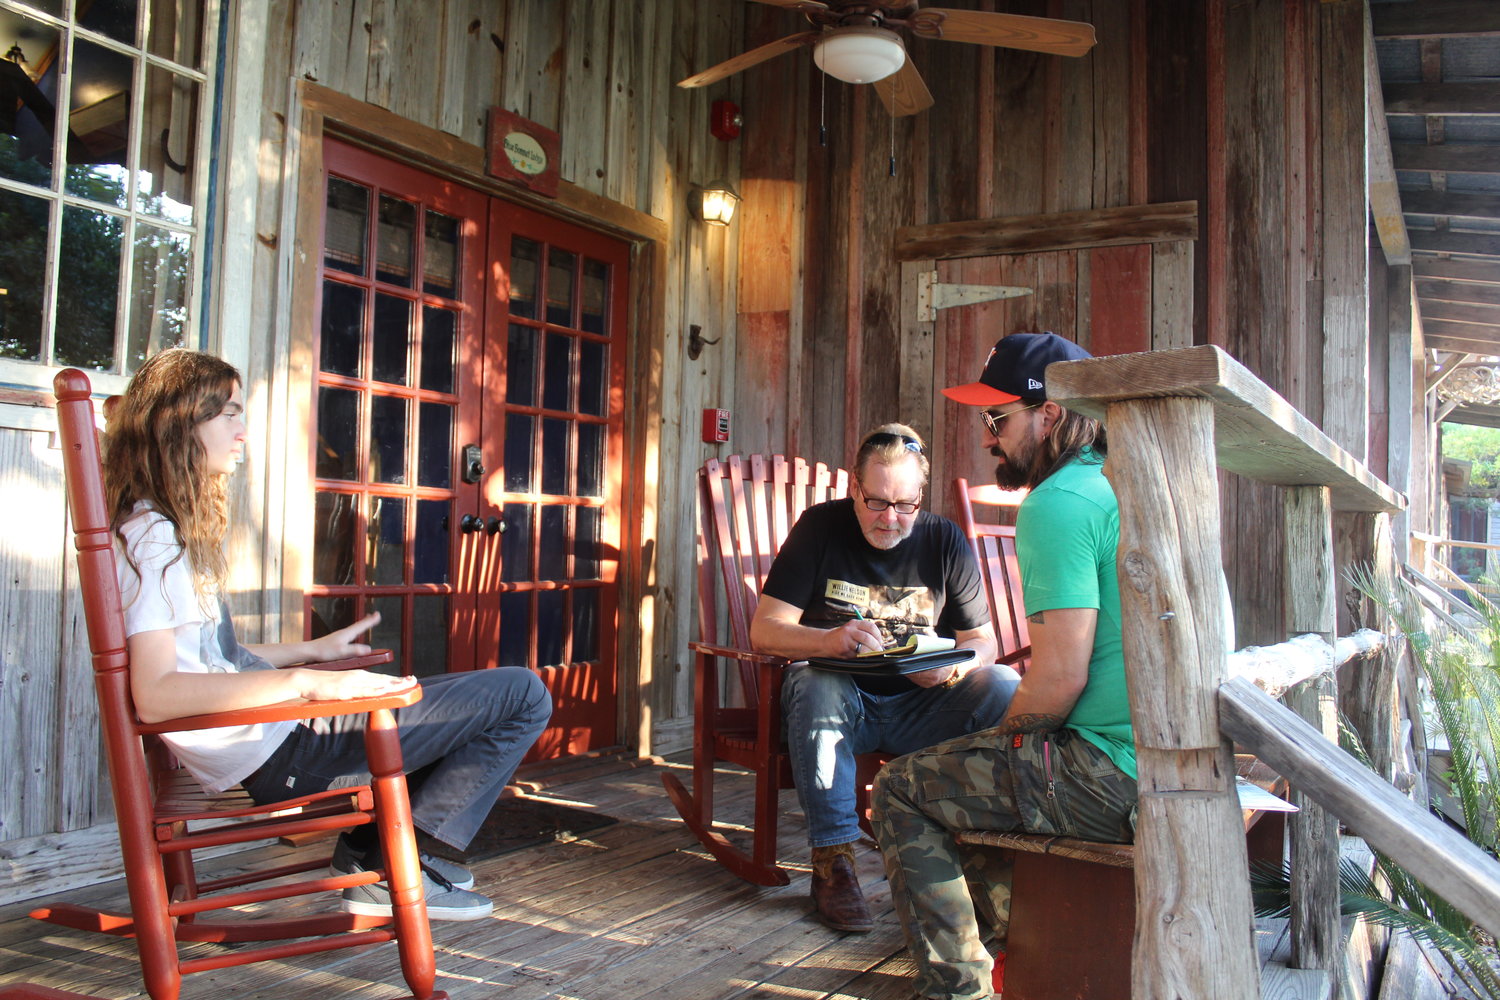 Saturday afternoon, Gonzales Inquirer publisher Terry Fitzwater was fortunate to meet Cody Canada and his son Dierks Cobain Canada just outside of Gruene Hall. They sat down for an interview before the show later that night.